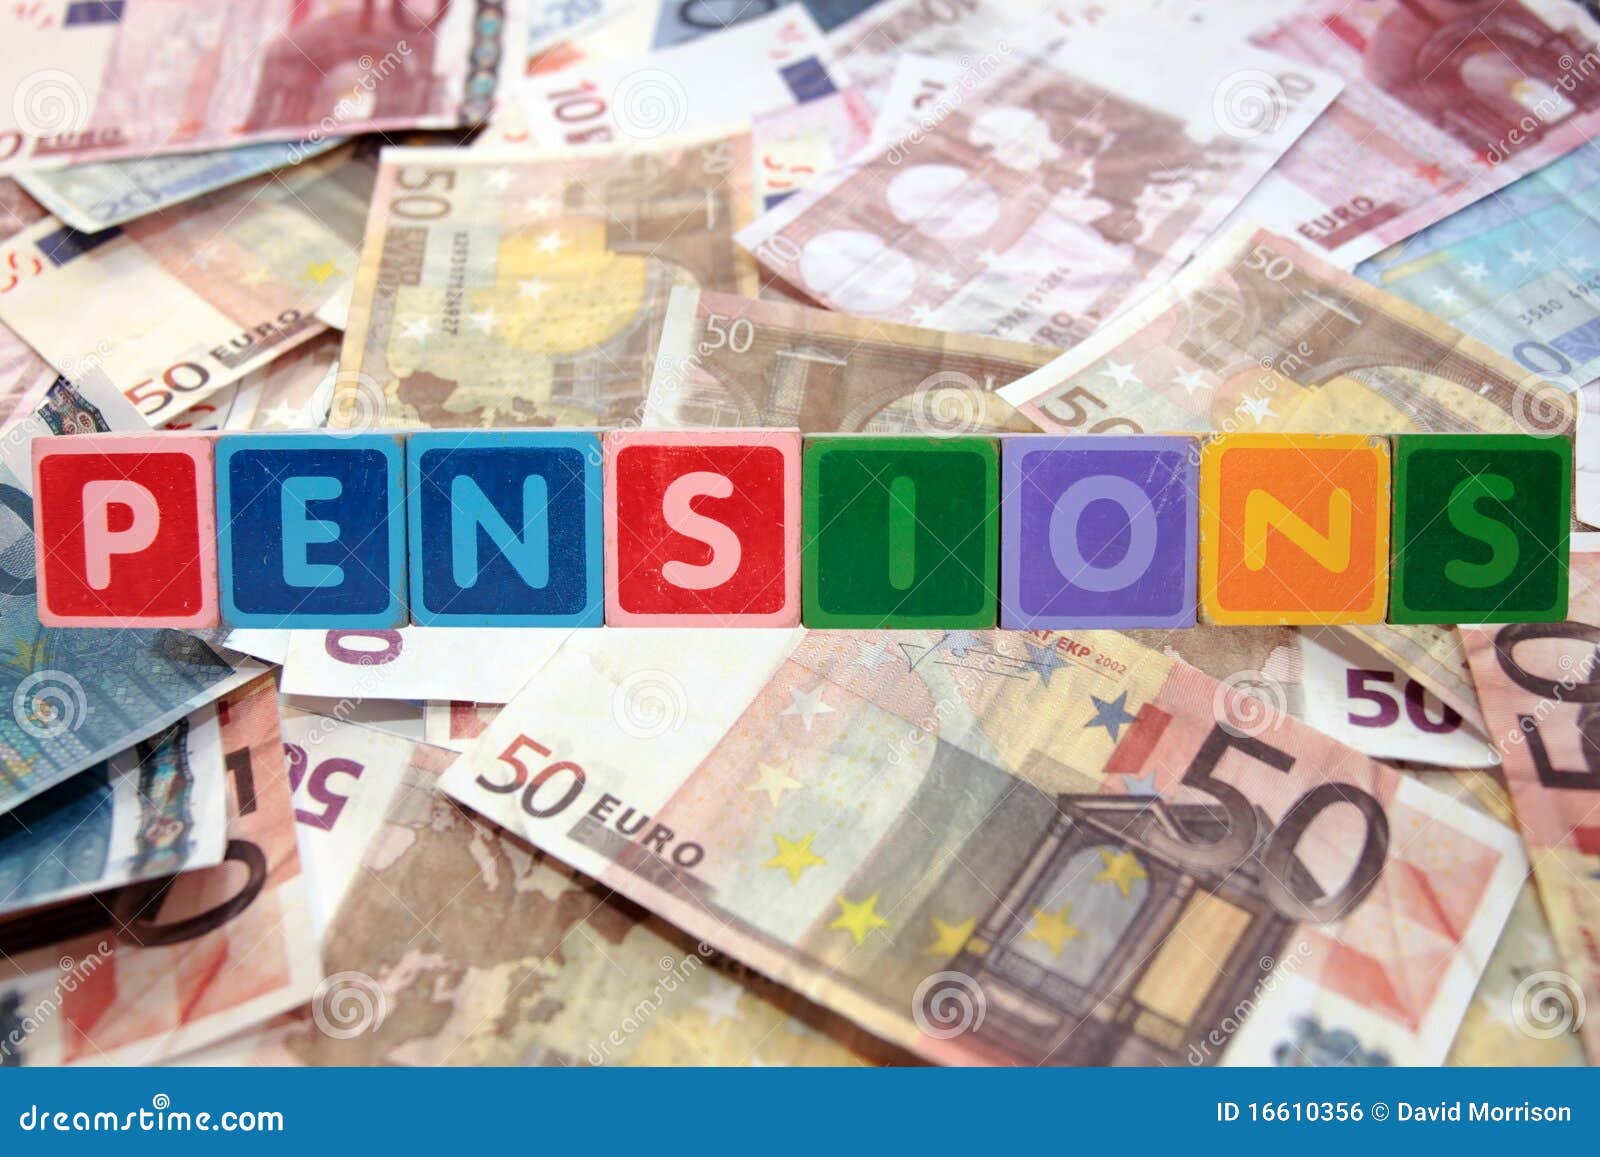 pensions in block letters with euros